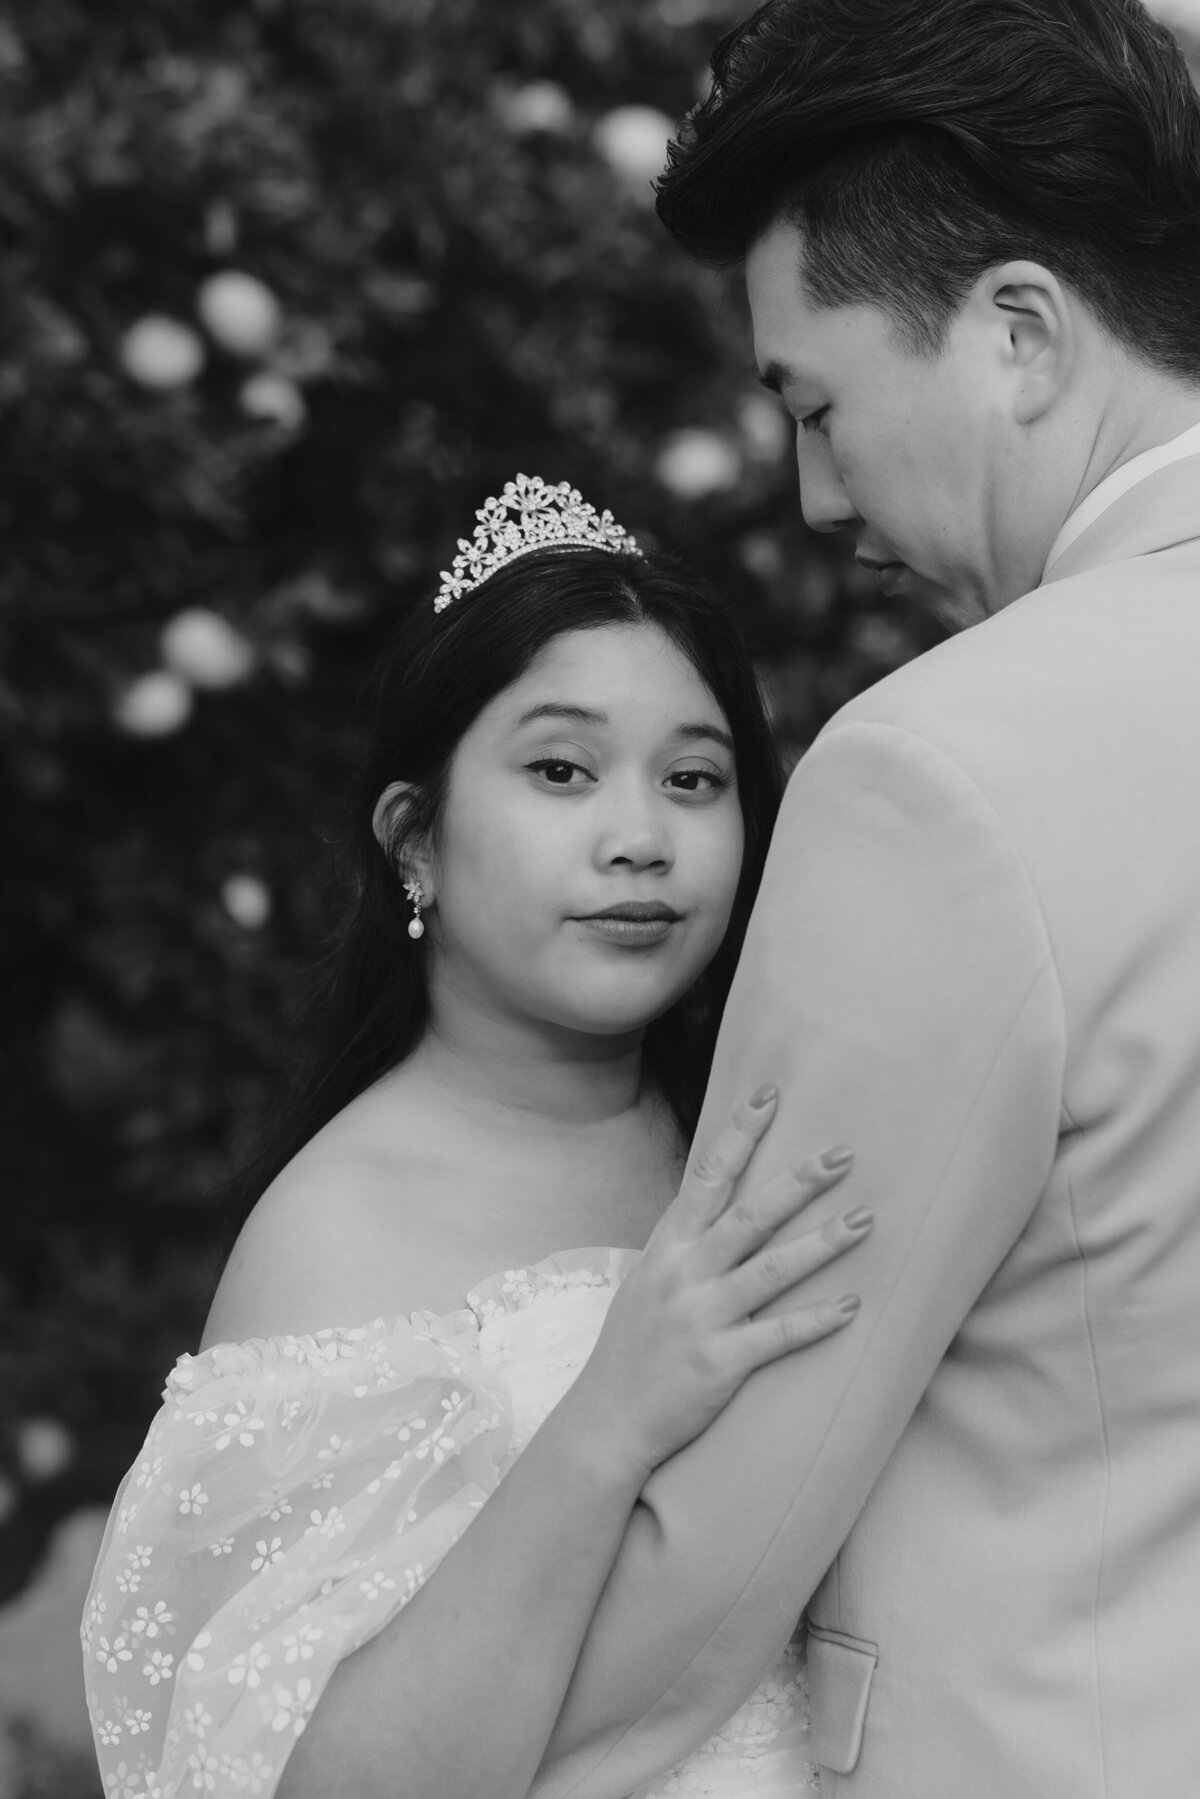 the bride wears a tiara as a head piece and holding the groom